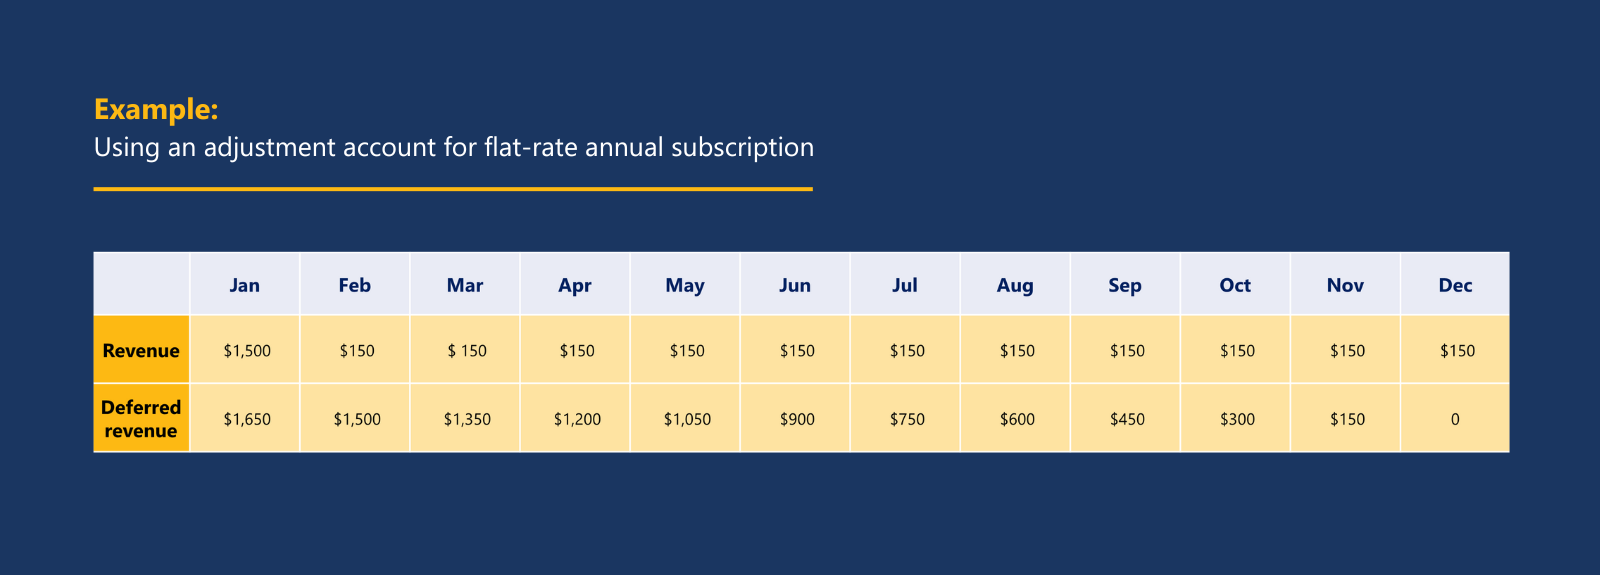 Using an adjustment account for flat-rate annual subscription